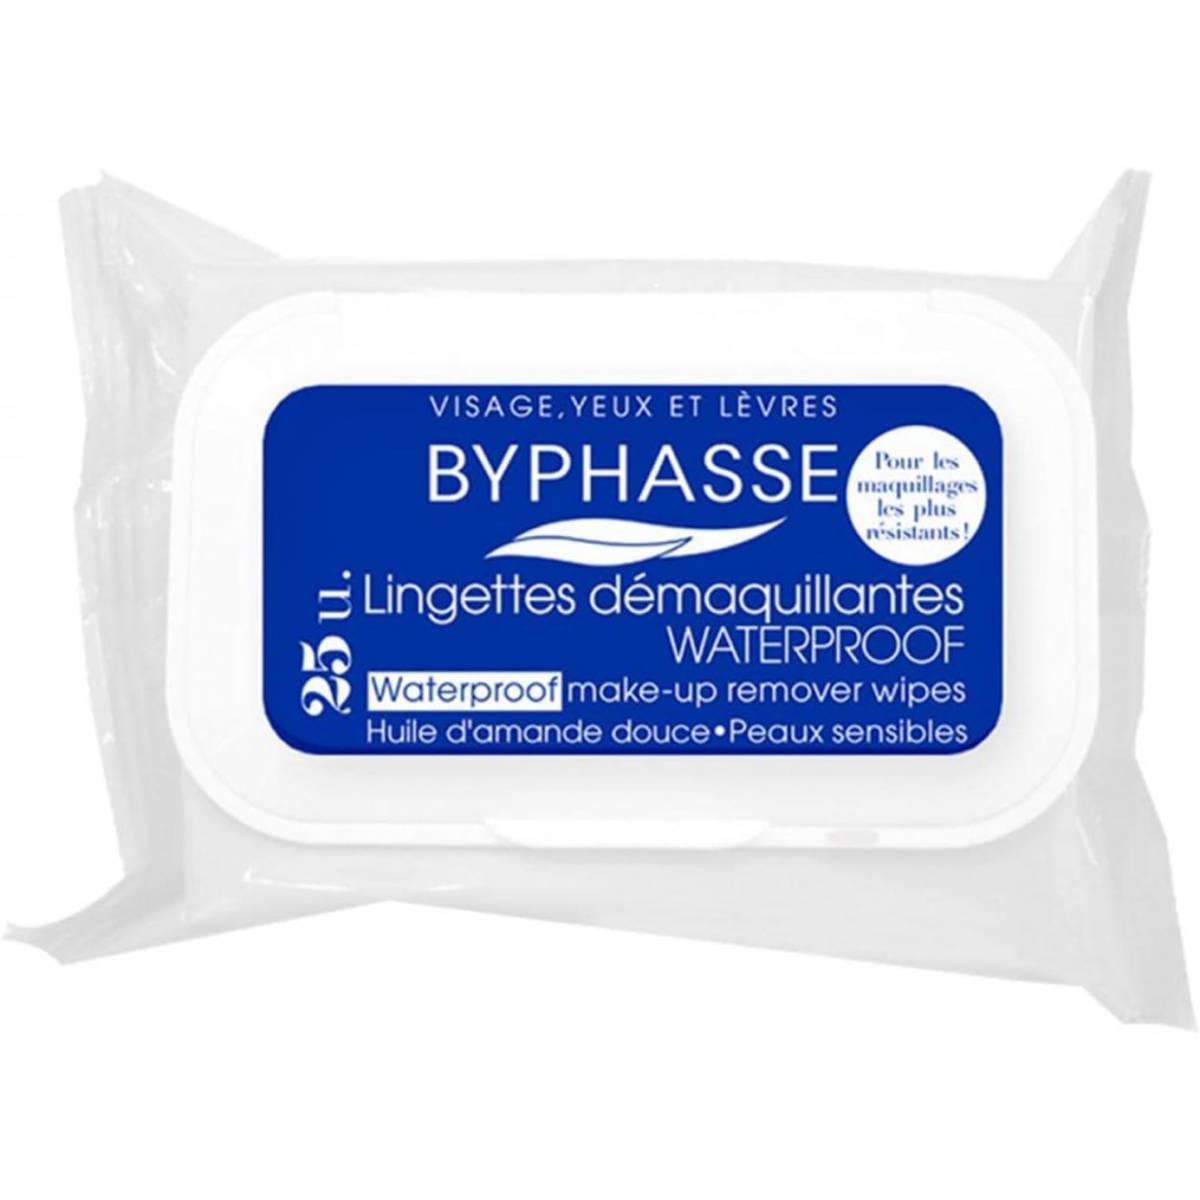 25 Lingettes Démaquillantes Waterproof Byphasse